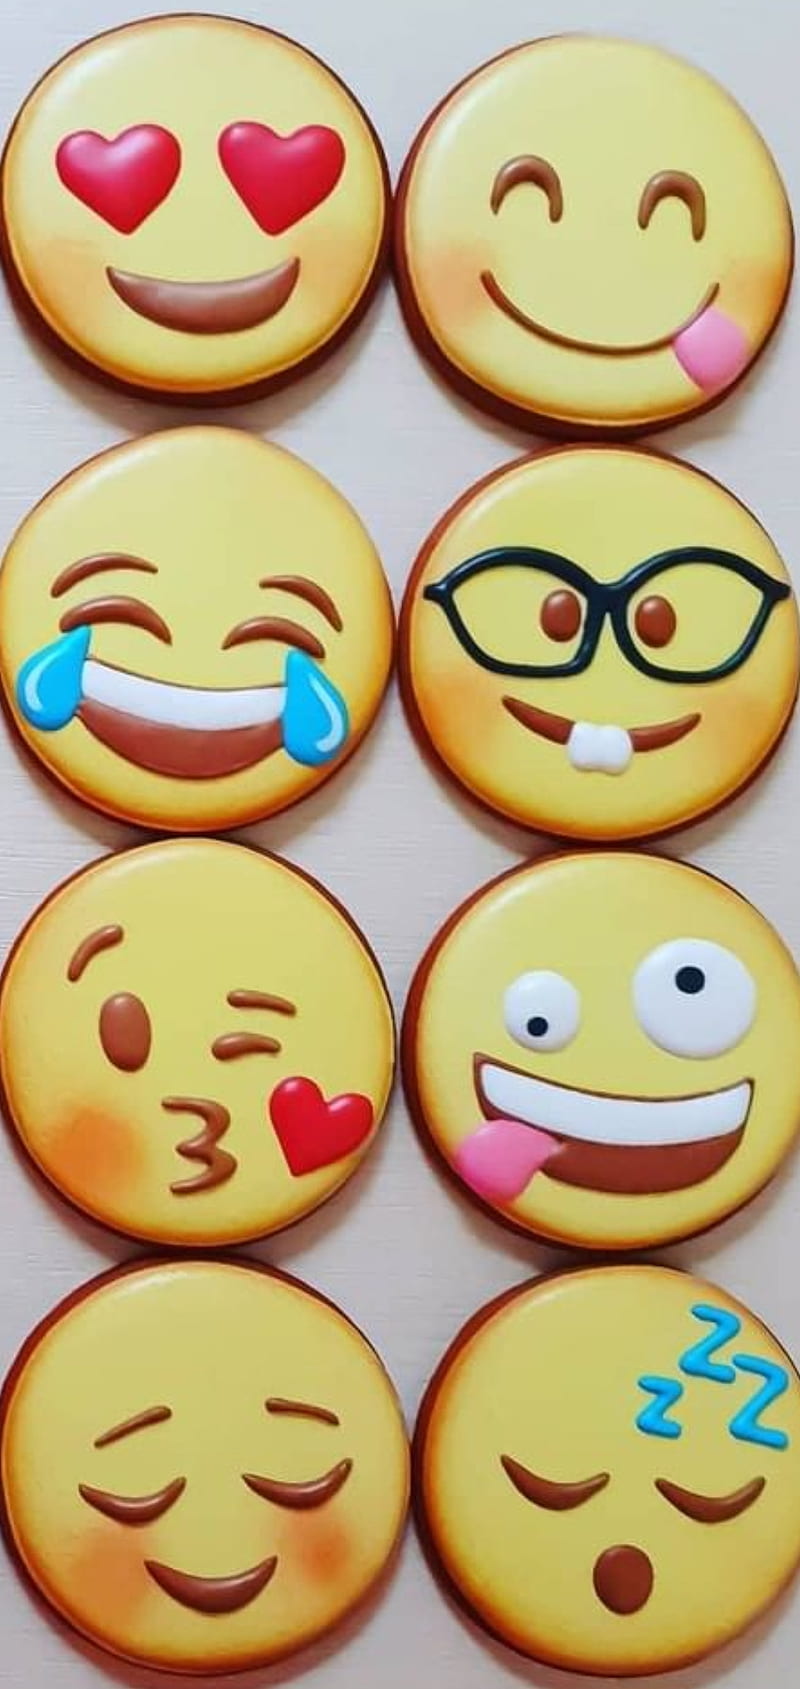 Pin by Md Sahil on Quick saves  Emoji for instagram, Me highlight